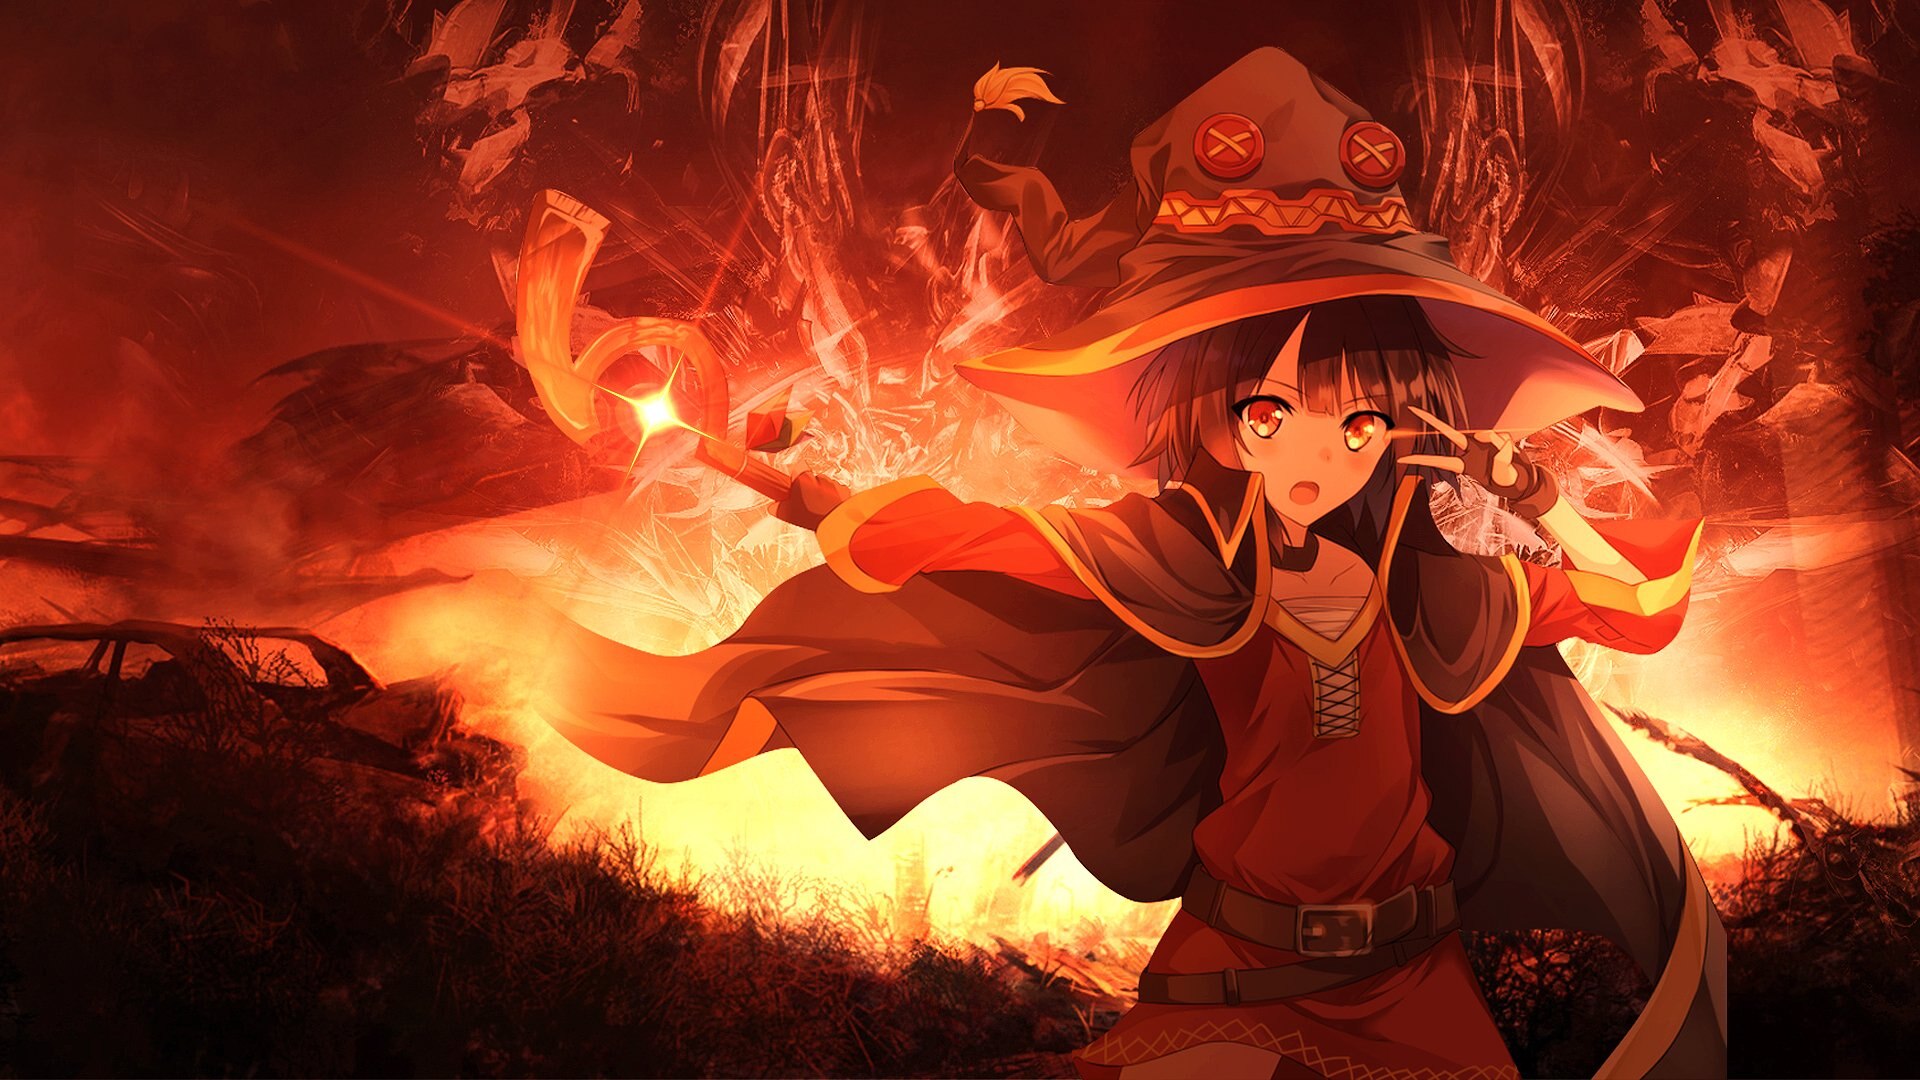 Anime Galleries dot Net - Random/Fire Dancer Pics, Images, Screencaps, and  Scans